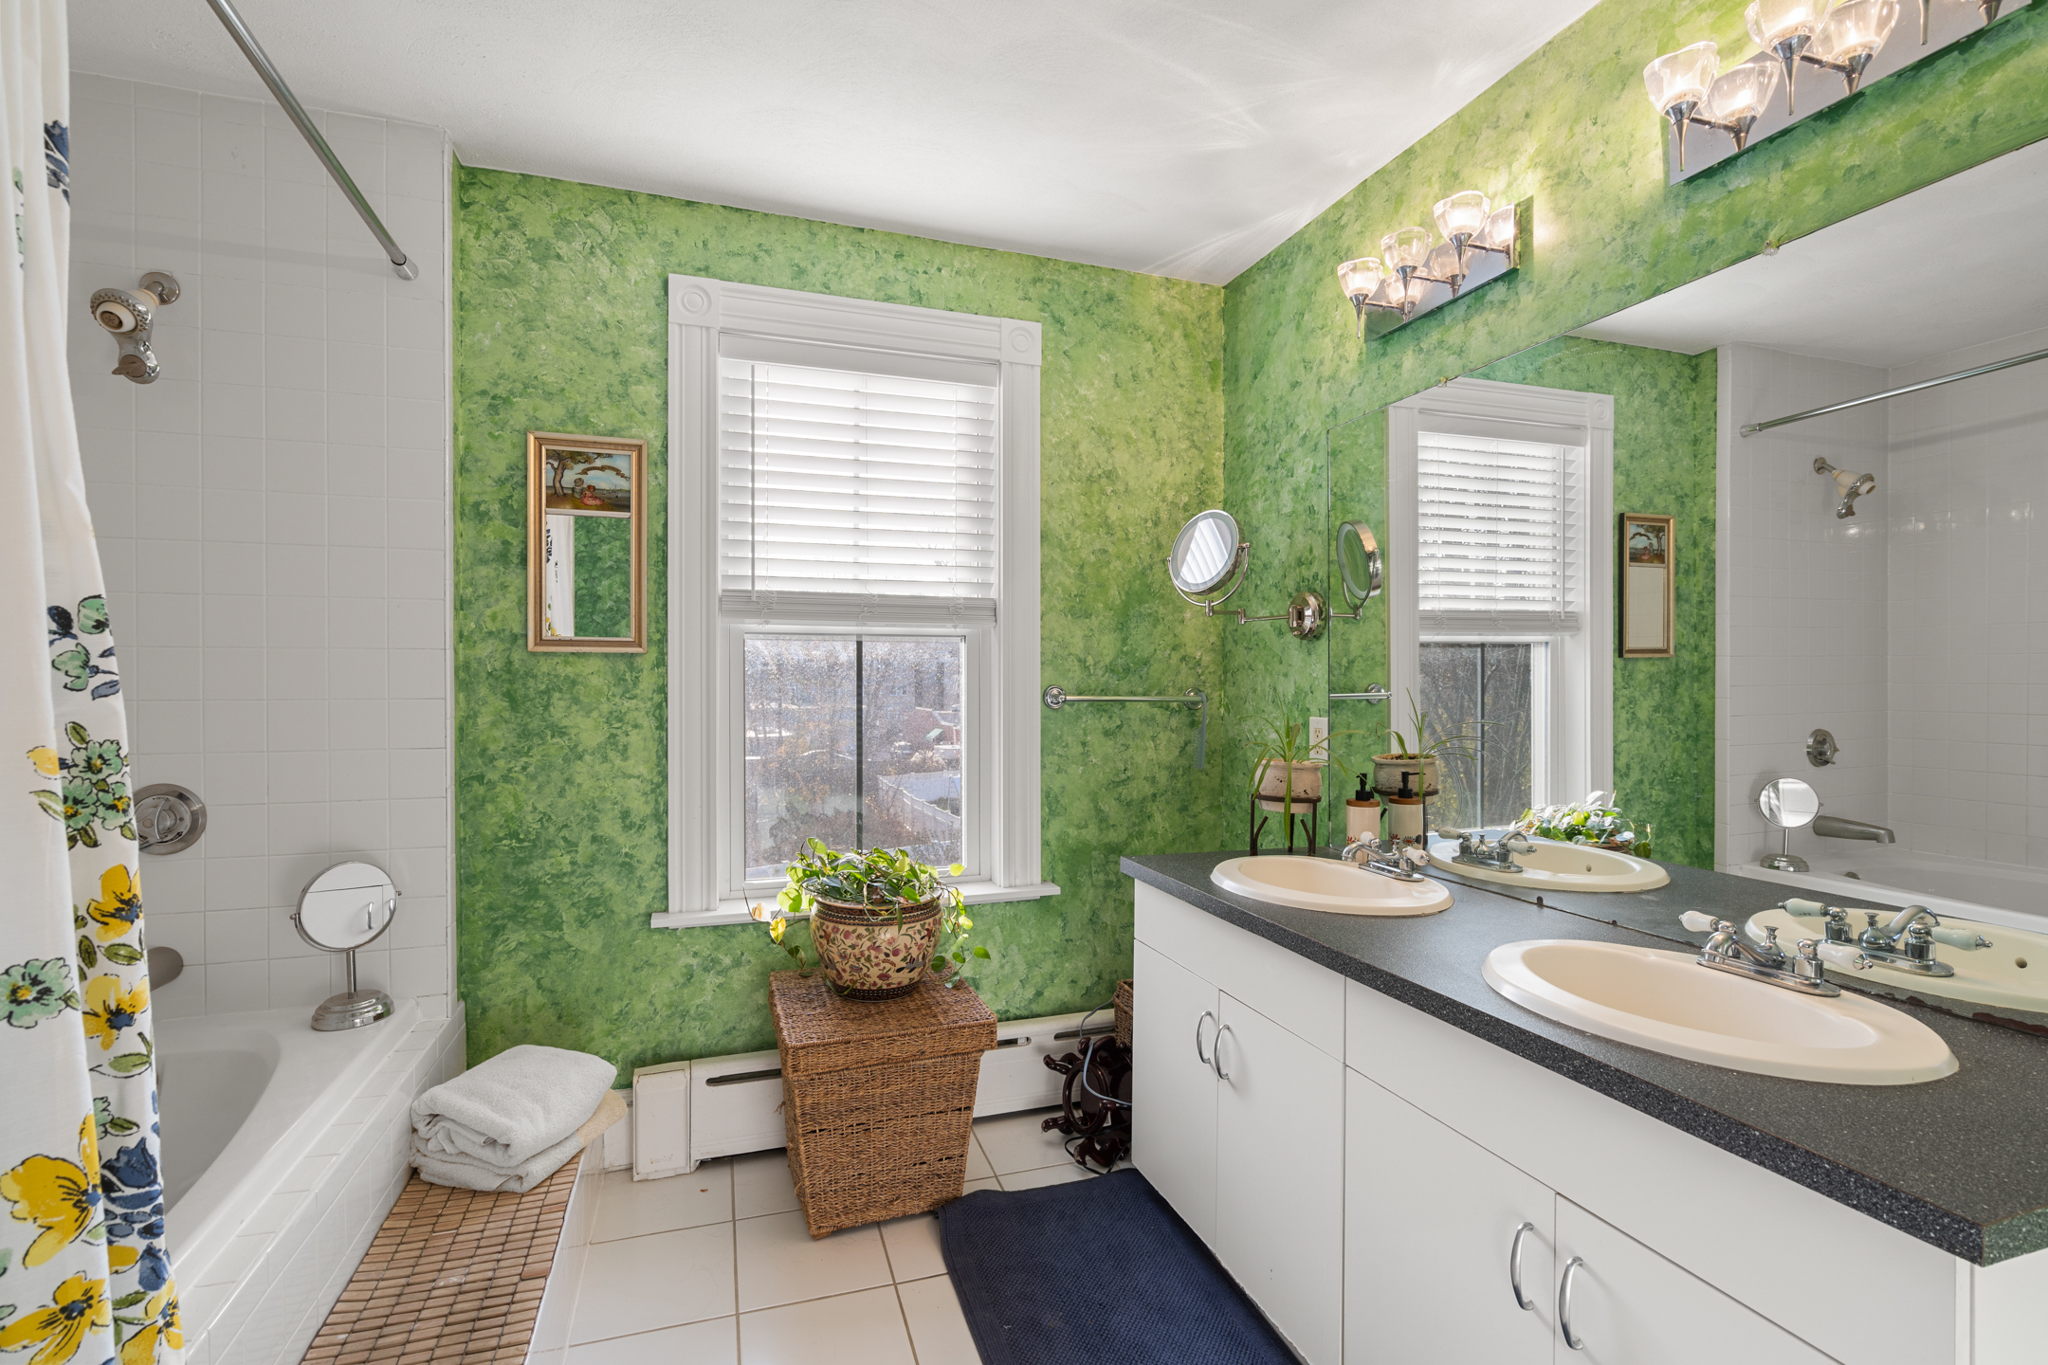 The shared bath has green walls that look like foliage, a white ceramic tile floor, a tub/shower combination behind a sunflower curtain, two sets of bulb lights above a frameless mirror, a white dual vanity with two sinks and a granite countertop, beige and navy throw rugs, and a hamper with a plant on top.